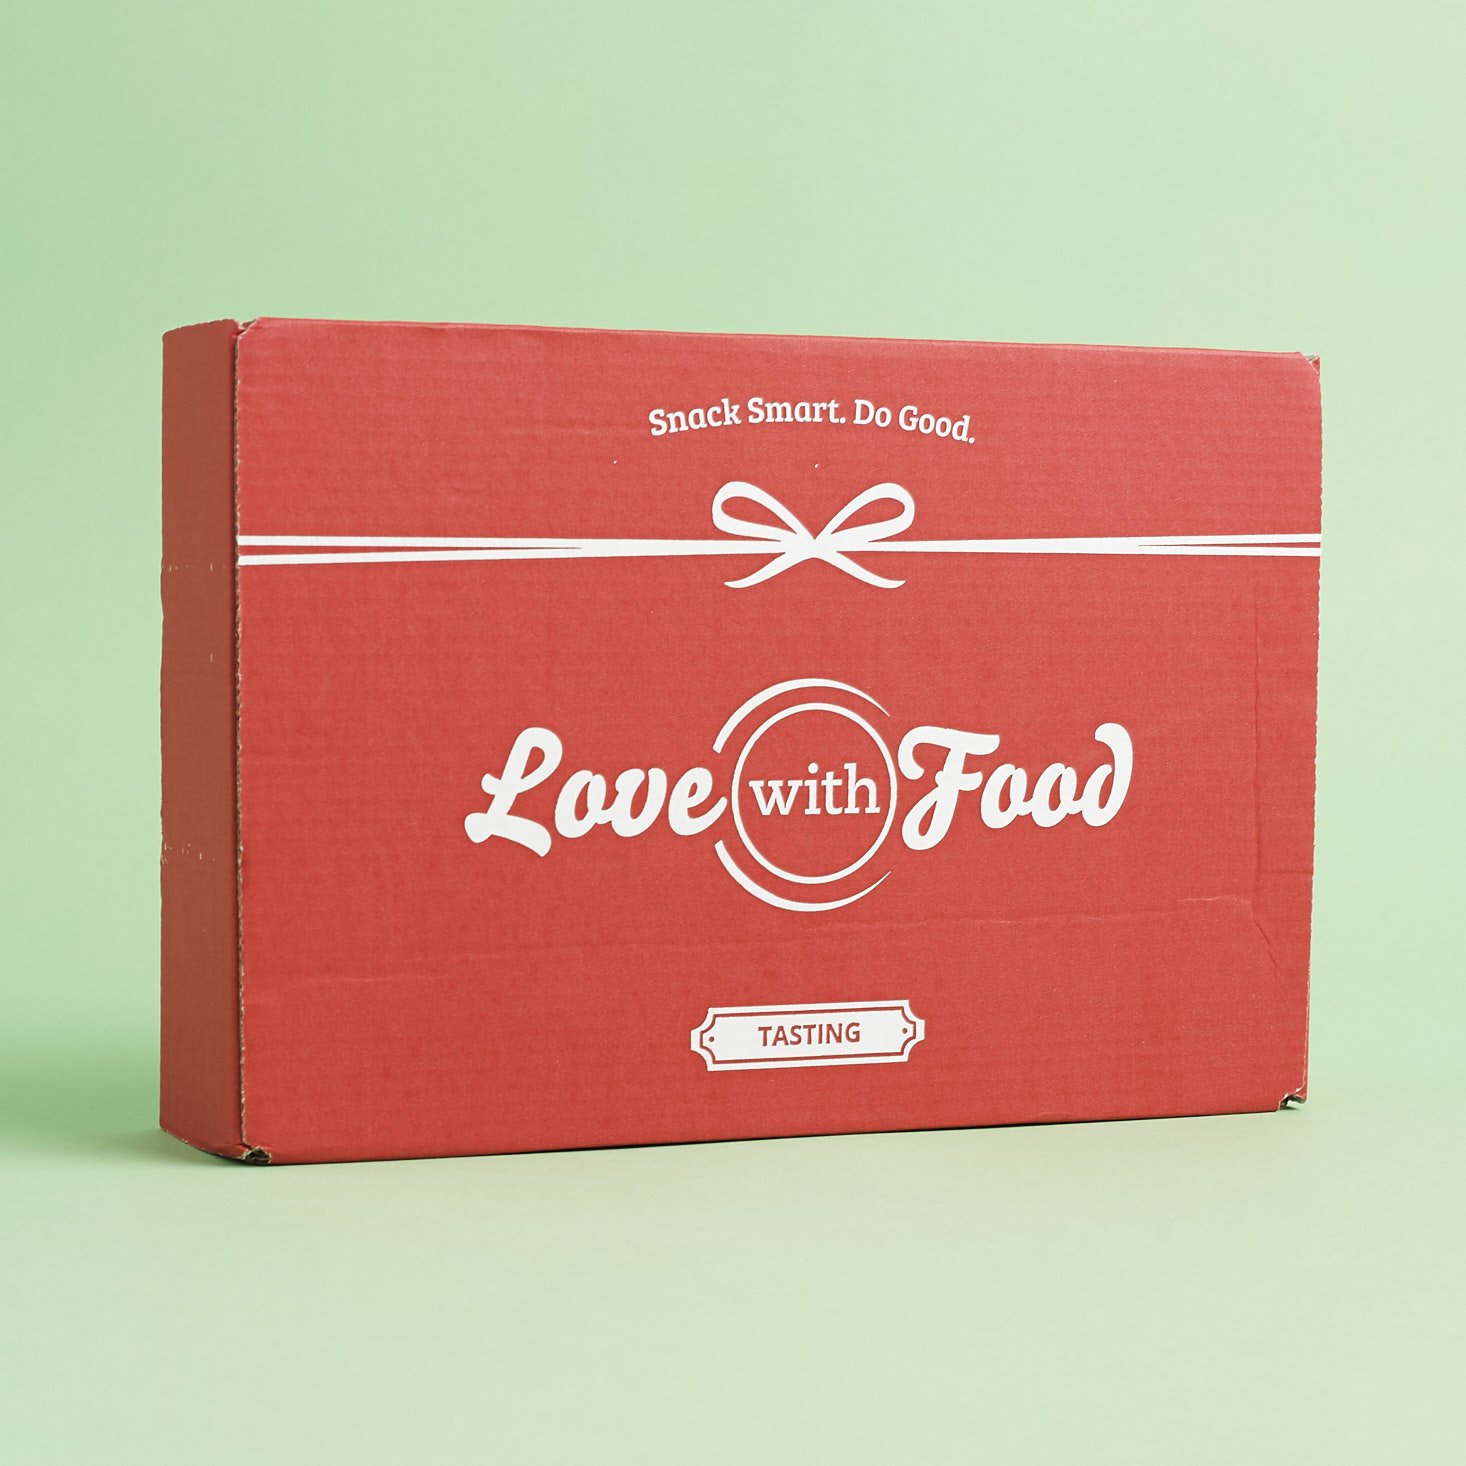 Love with Food Tasting Box Review + Coupon – July 2018